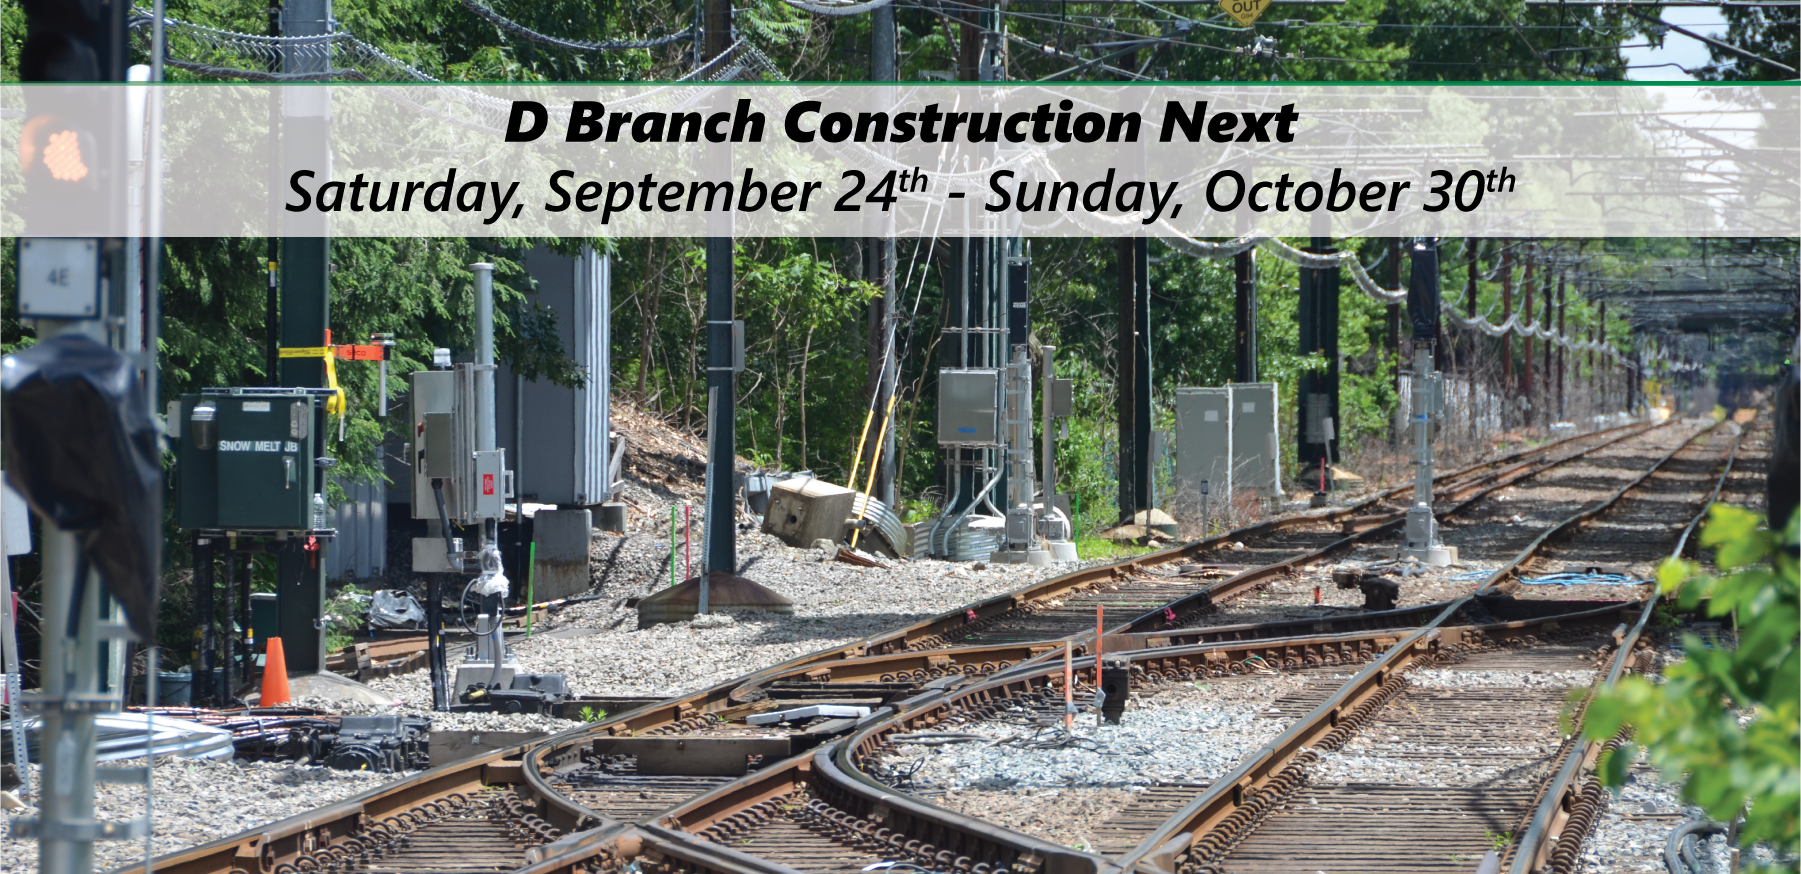 D Branch Construction Is Coming Next